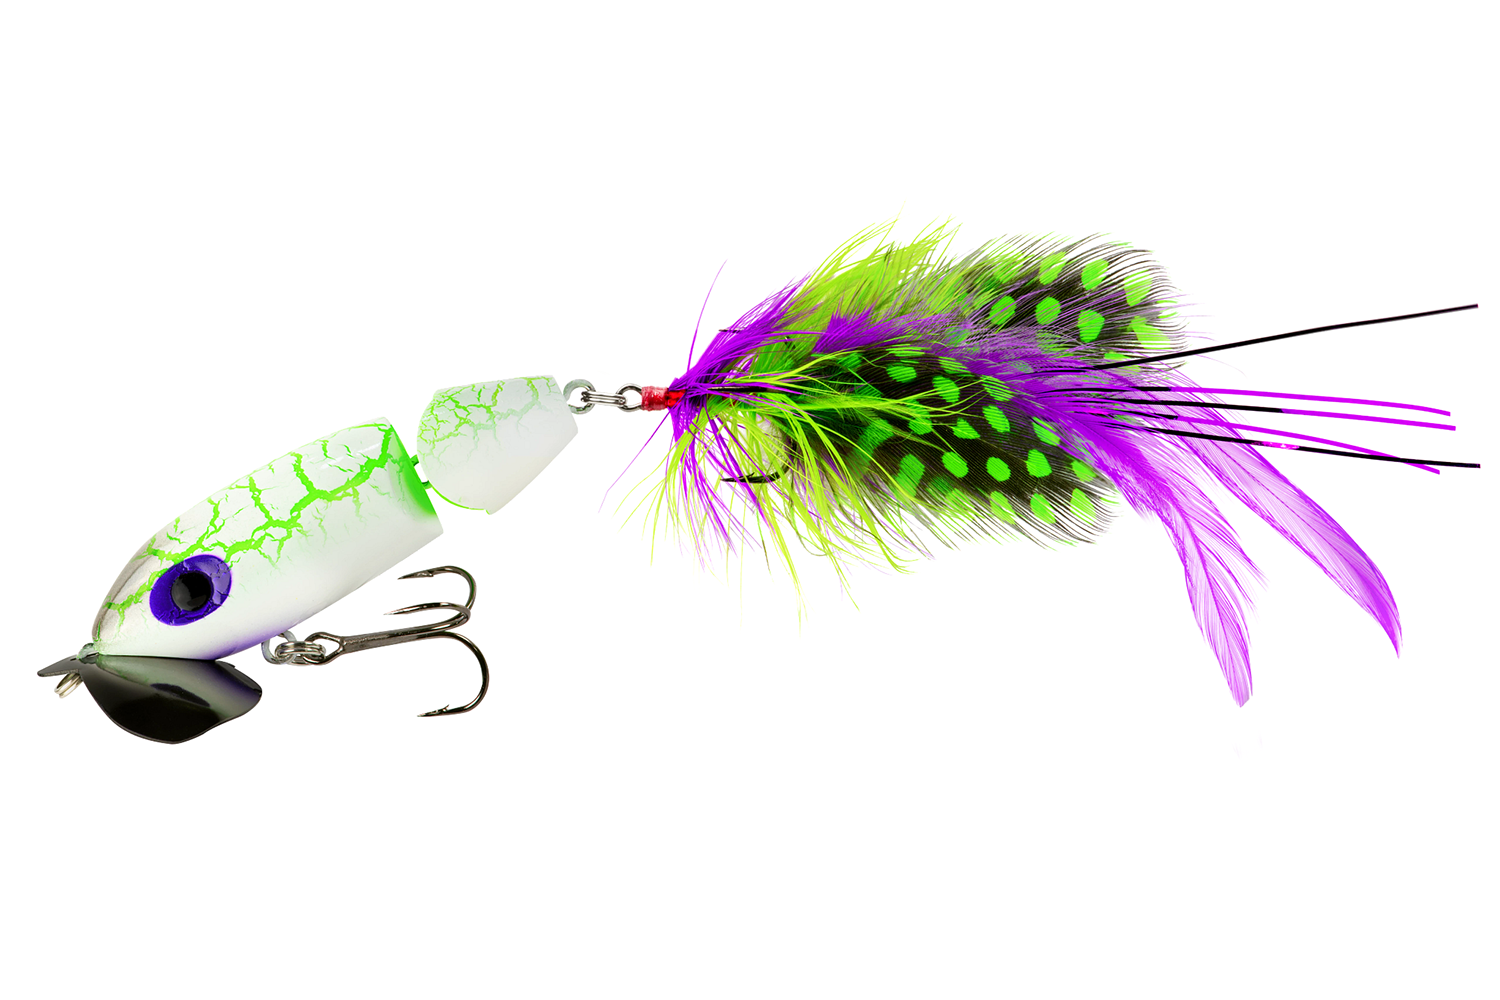 <p><b>Arbogast Jointed Jitterbug 2.0 </b></p>
<p>The Arbogast Jointed Jitterbug is a new age take on a timeless classic like the Hula Popper 2.0 project. The new model features modern improvements such as upgraded hook hangers with split rings and black nickel treble hooks, upgraded joint connection to provide a smoother track across the surface, anodized head plate, and exclusive crackle paint schemes.</p>
<p><a href=